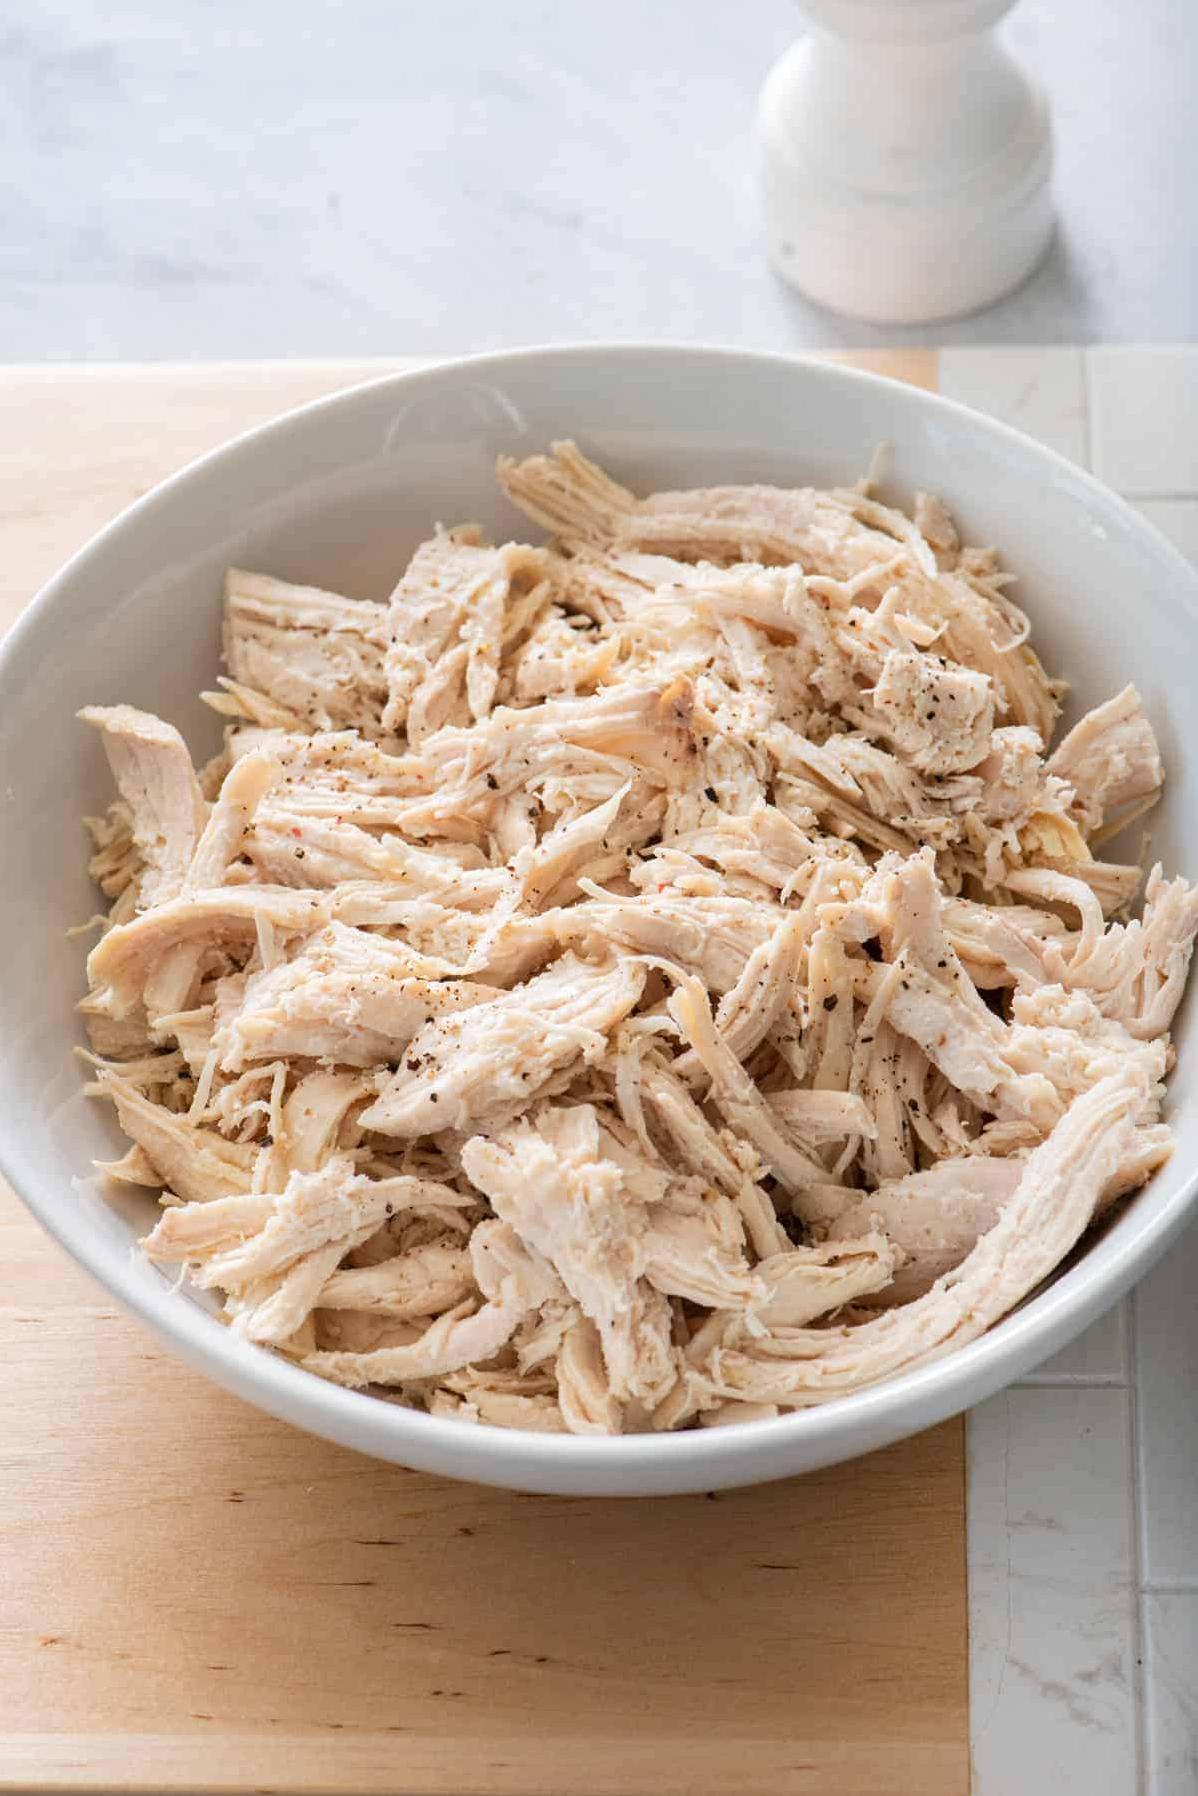  Tender and juicy shredded chicken ready in just minutes!